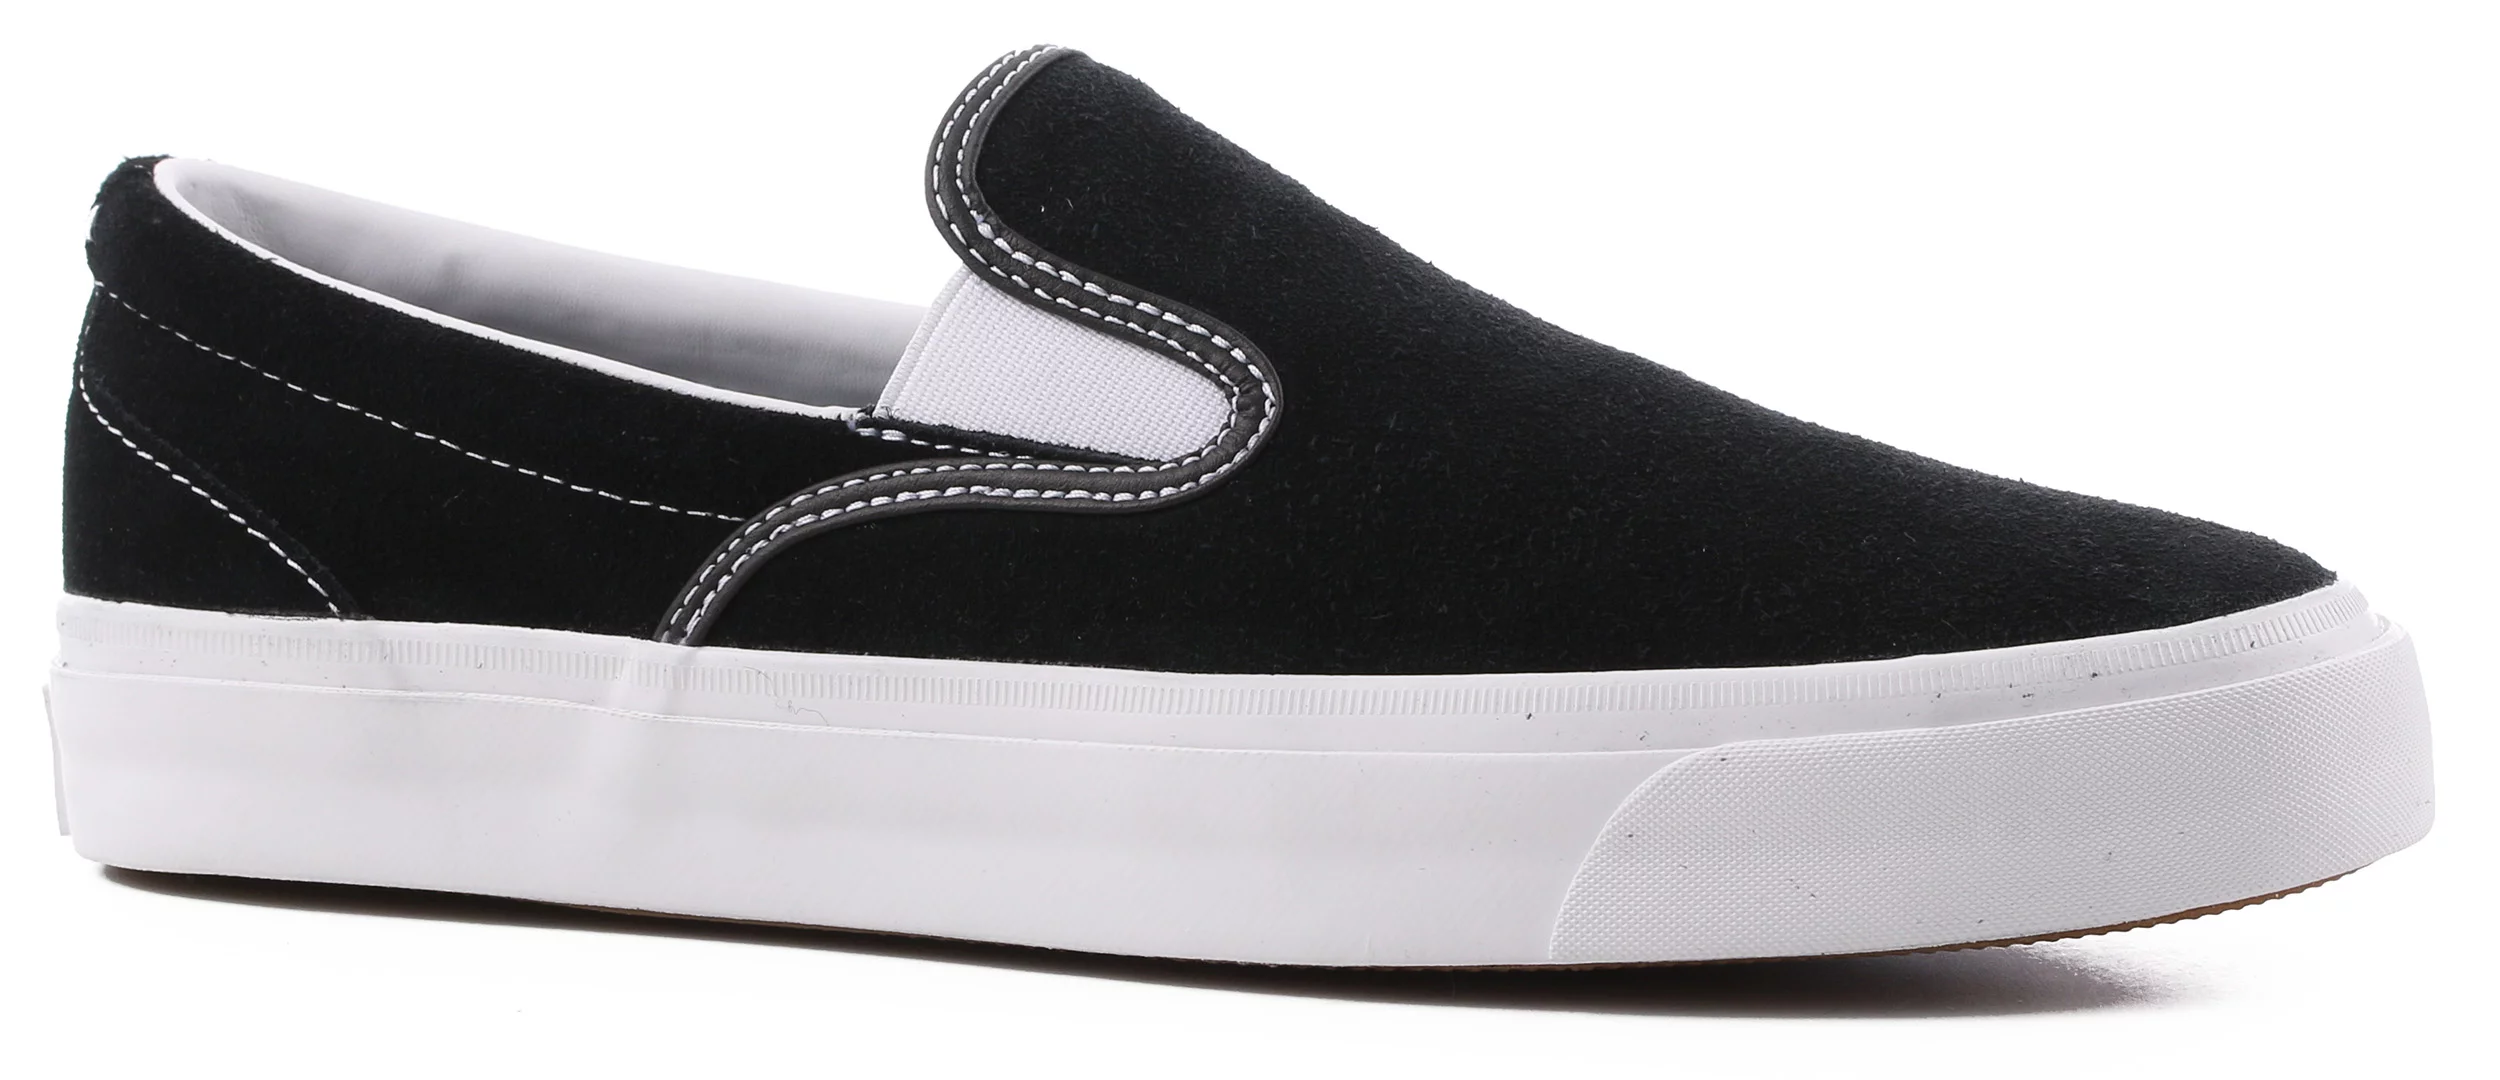 Converse One Star CC Slip-On Shoes black/white/white - Shipping | Tactics